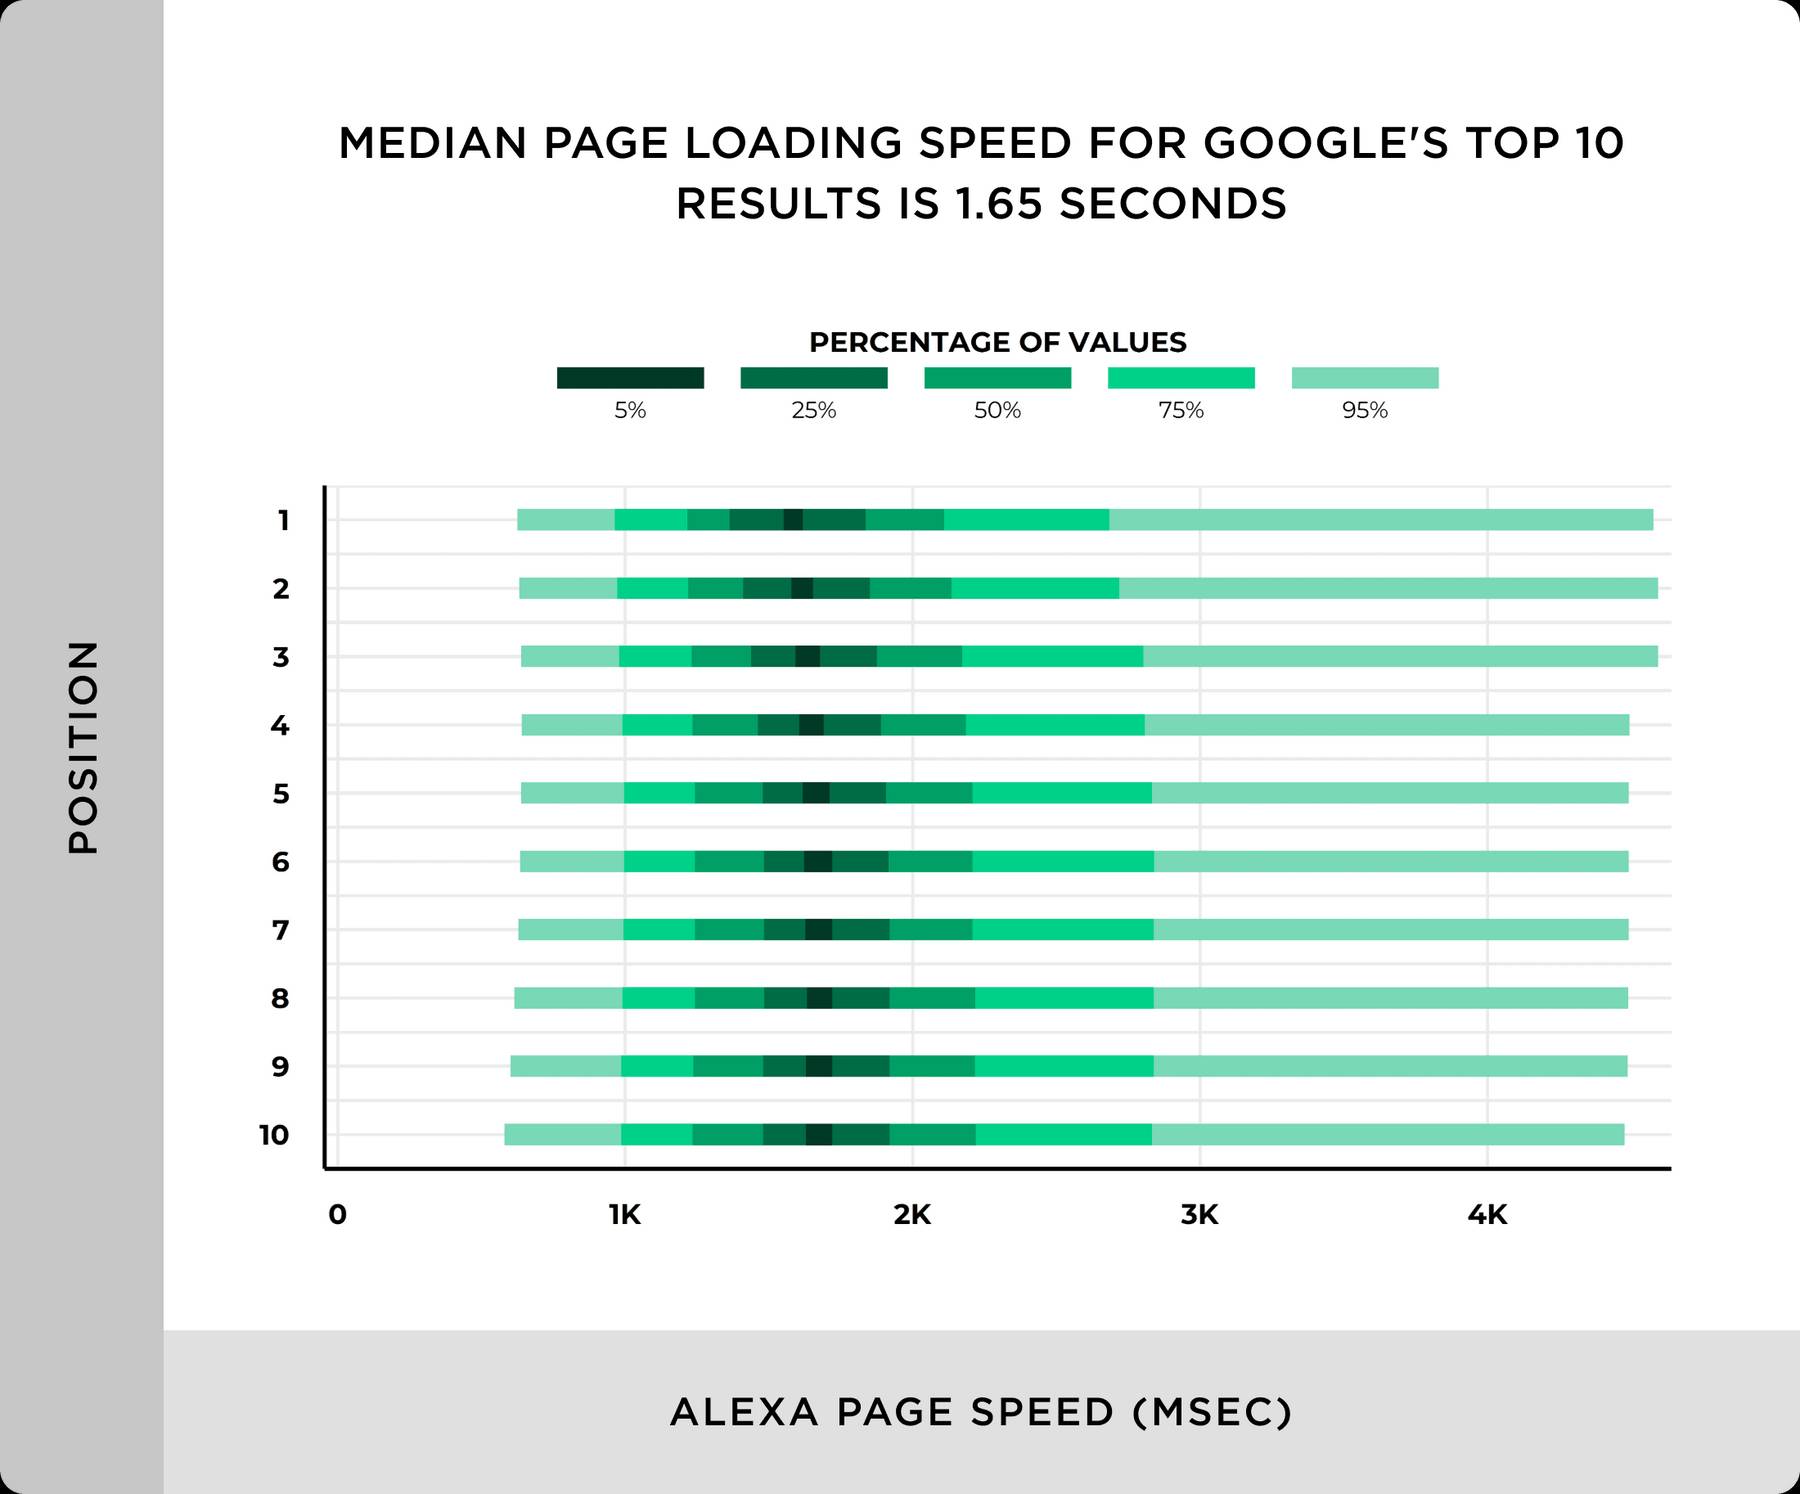 Backlinko's findings on average page loading speeds